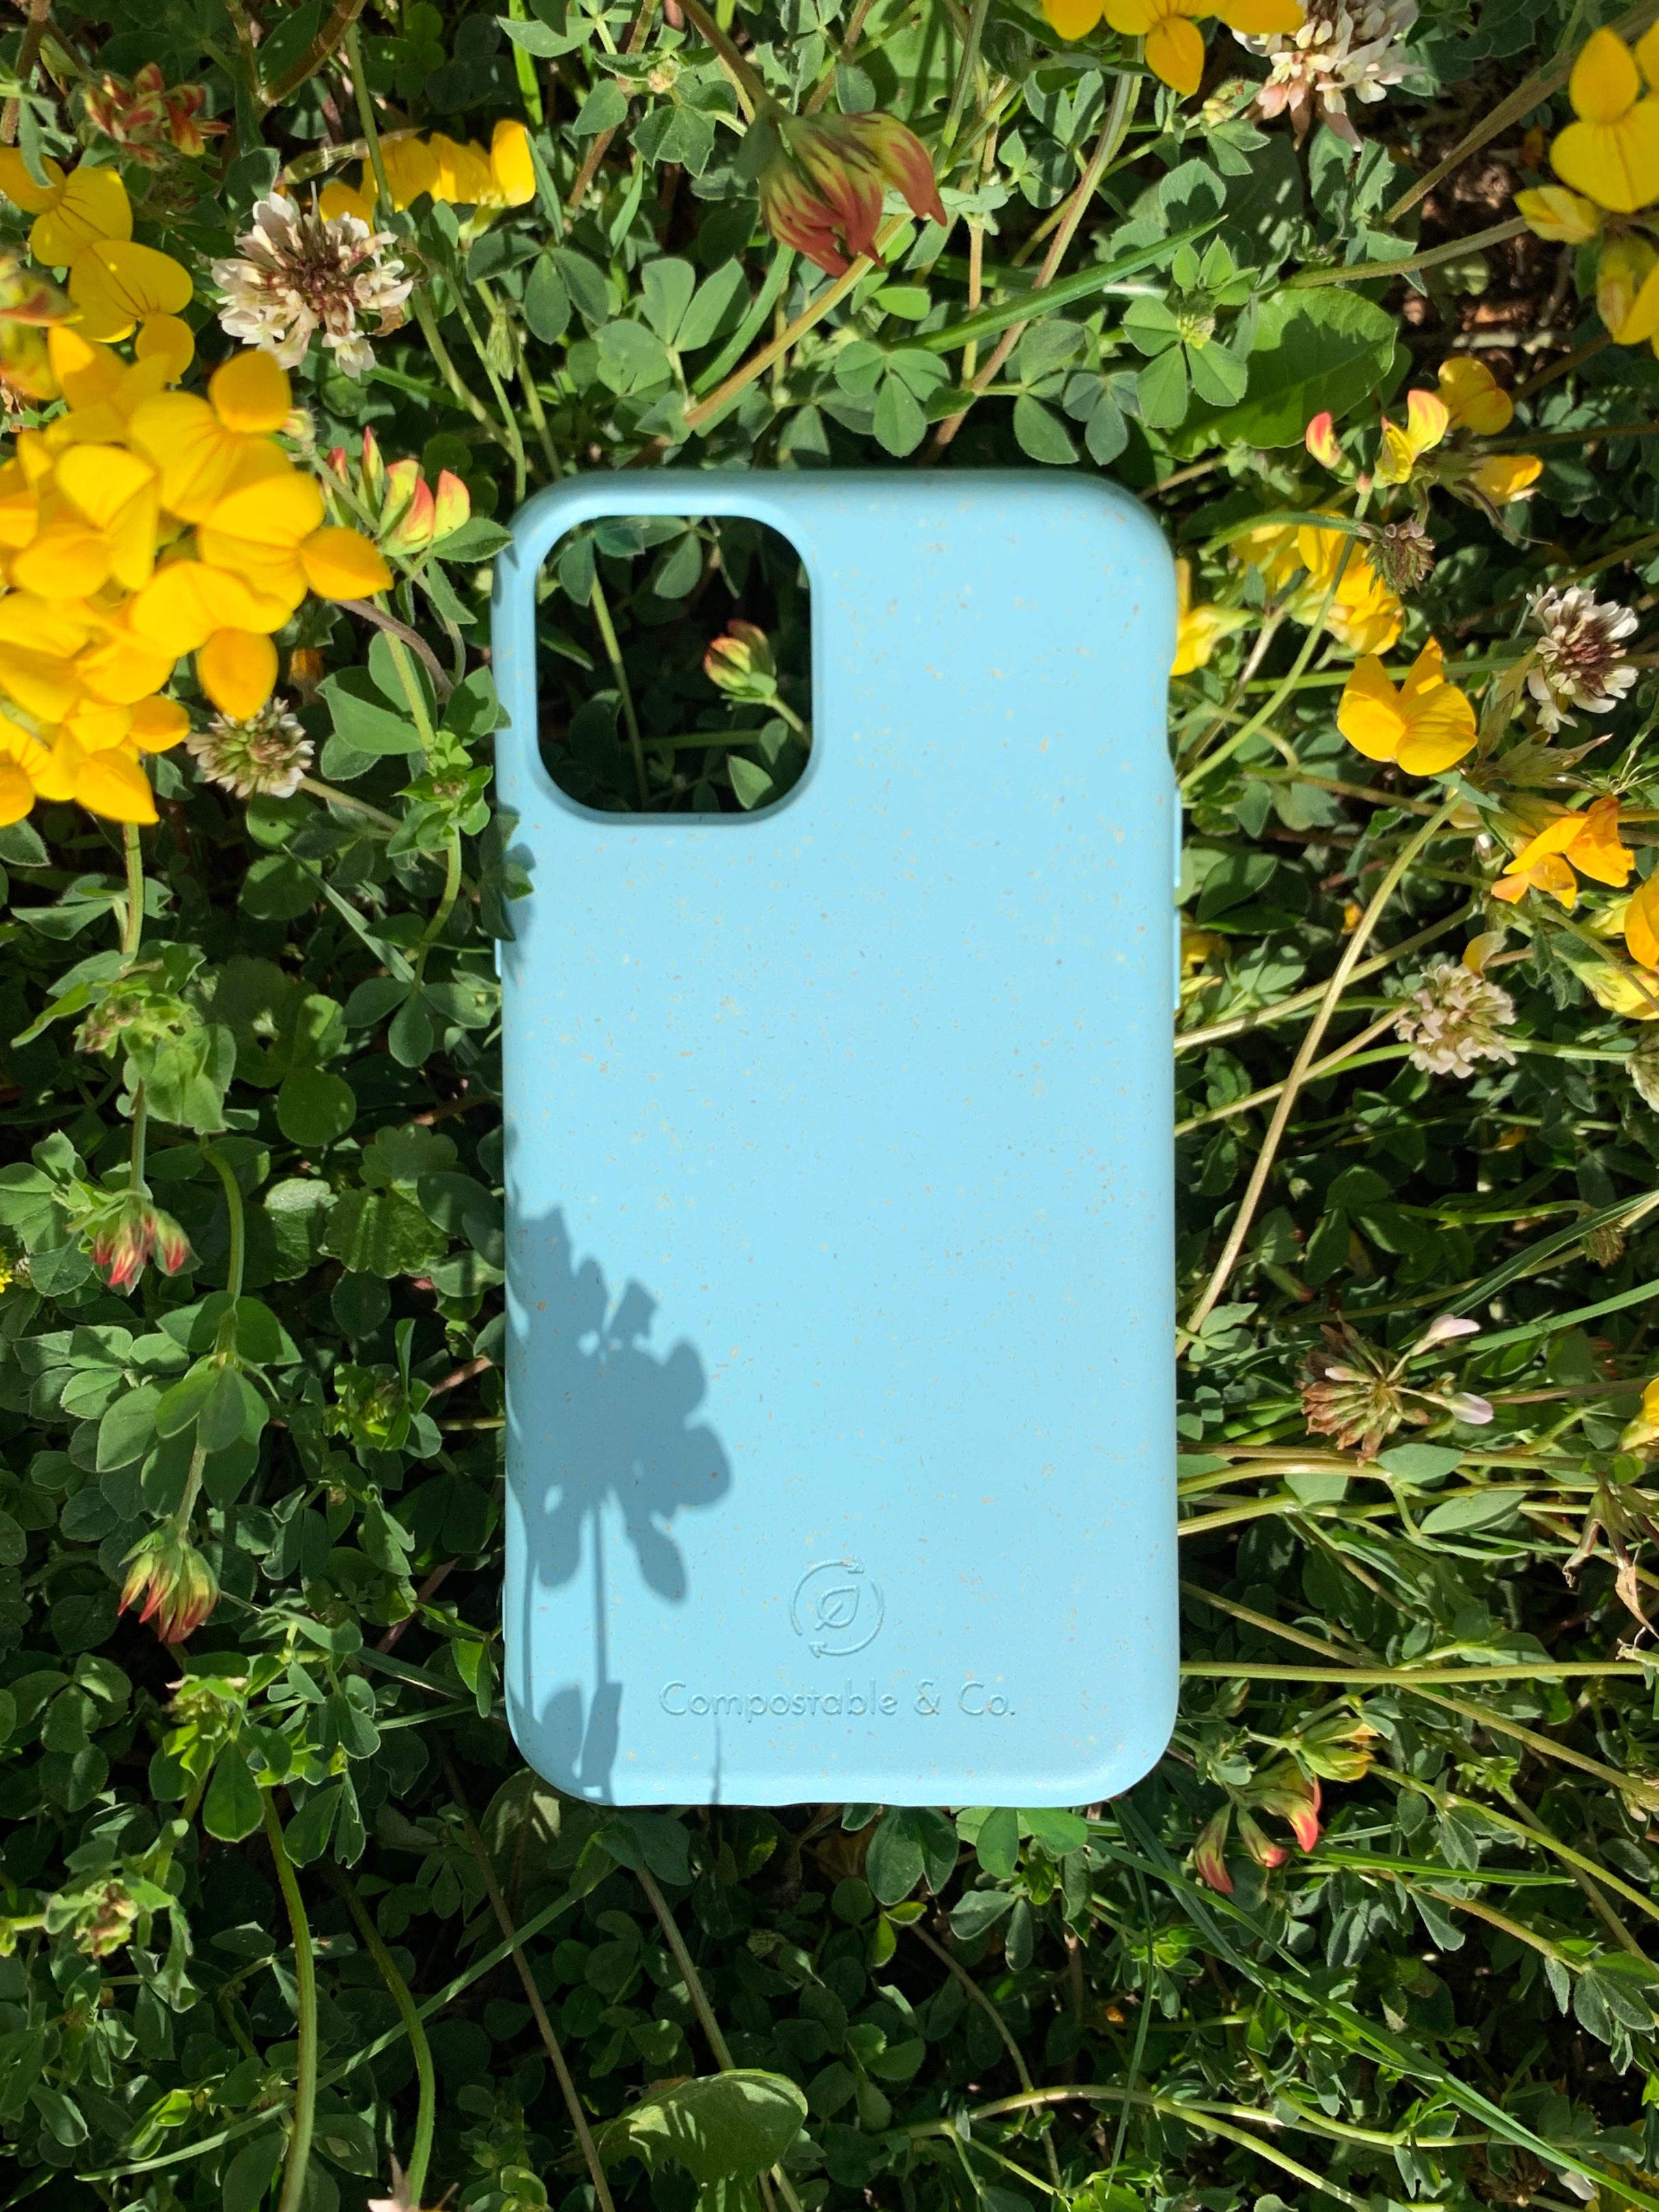 Compostable & Co. iPhone 12 blue biodegradable phone case in nature